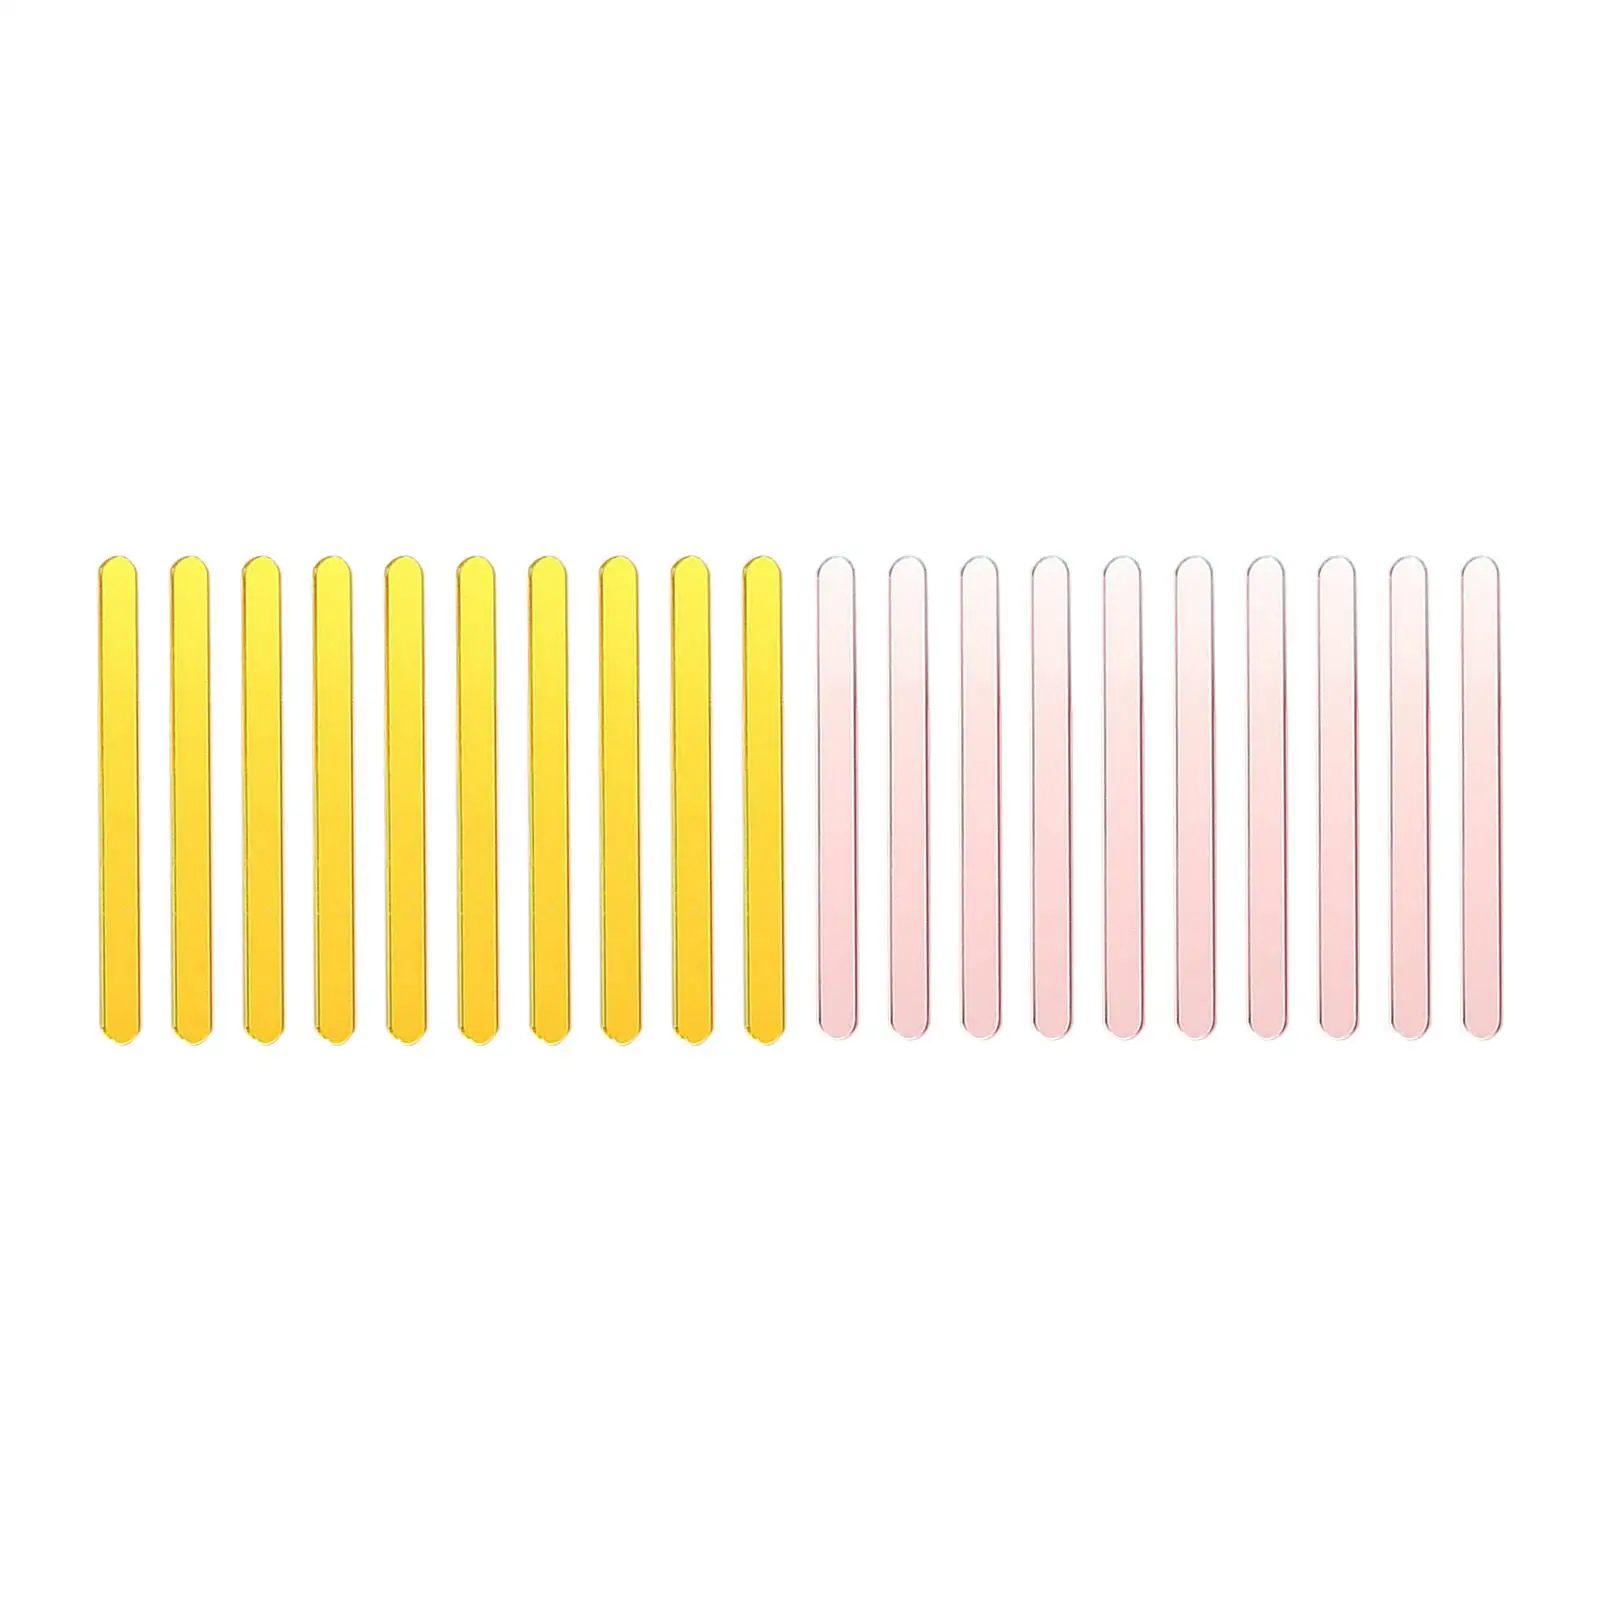 20x Ice Cream Sticks Party Favors Reusable Acrylic Craft Making Craft Sticks Cakesicle Sticks for DIY Crafts Home Kitchen